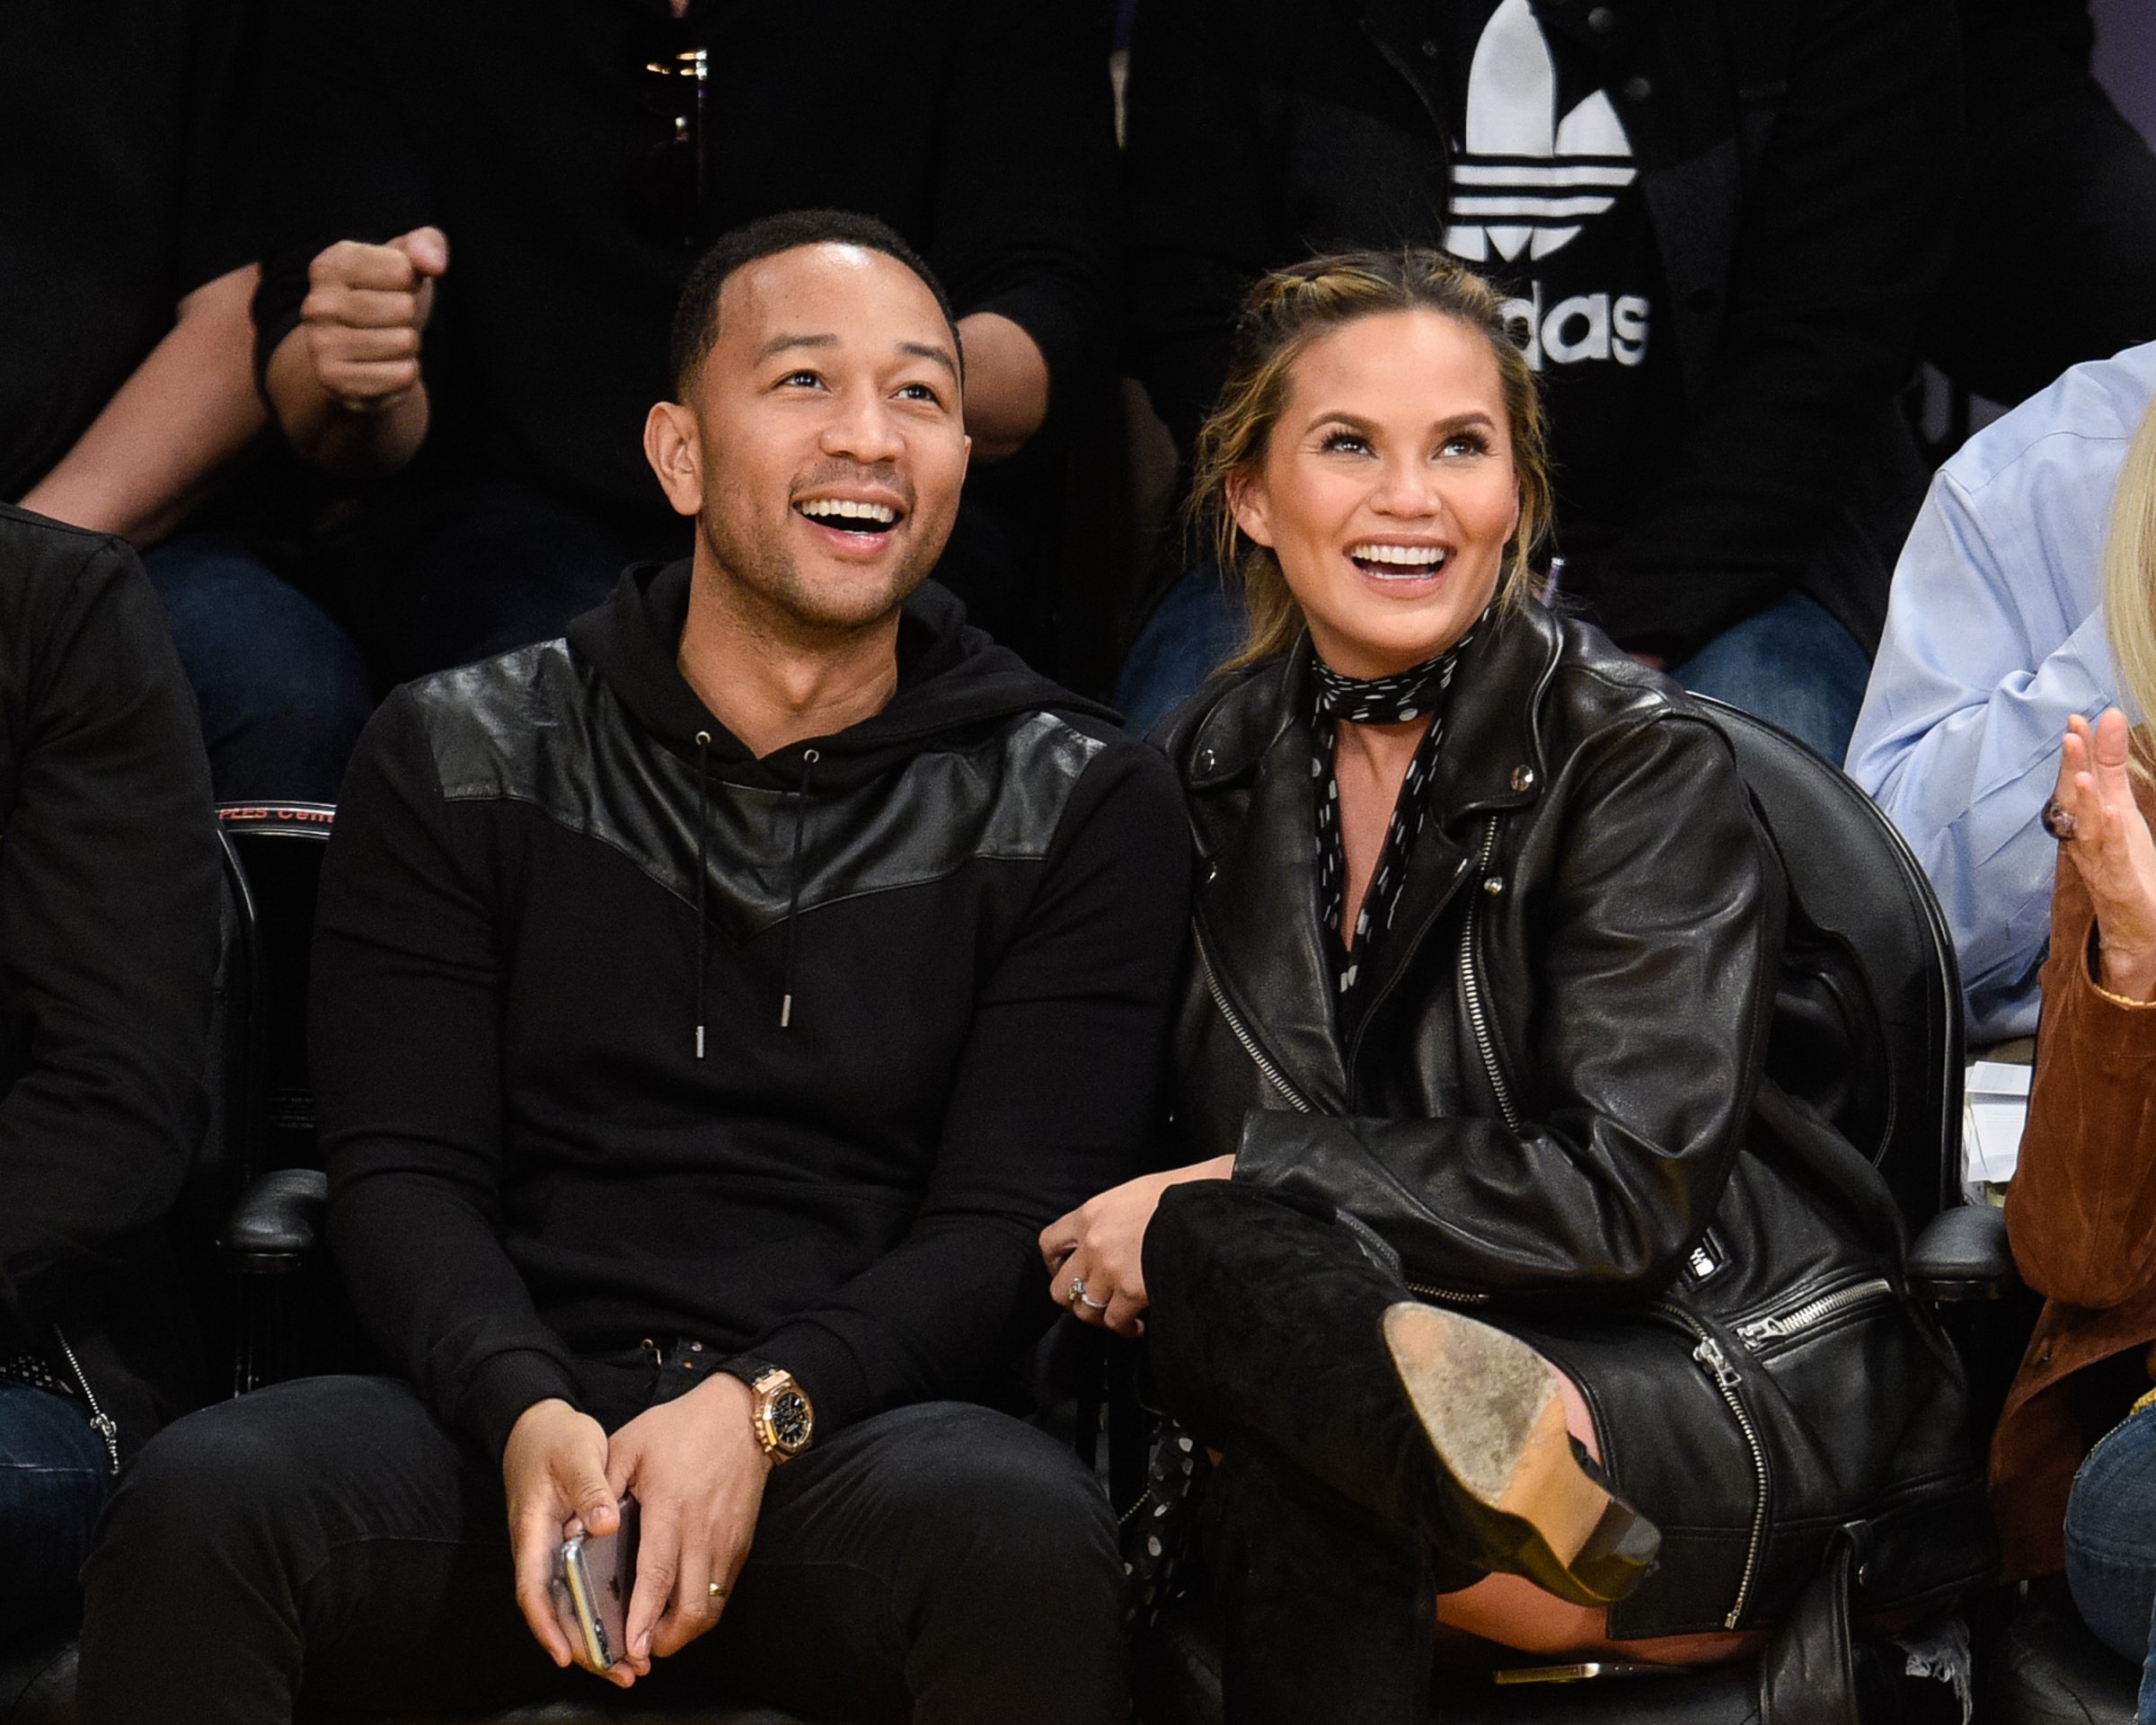 John Legend and Chrissy Teigen attend a basketball game between the Cleveland Cavaliers and the Los Angeles Lakers at Staples Center on March 10, 2016 in Los Angeles, California.